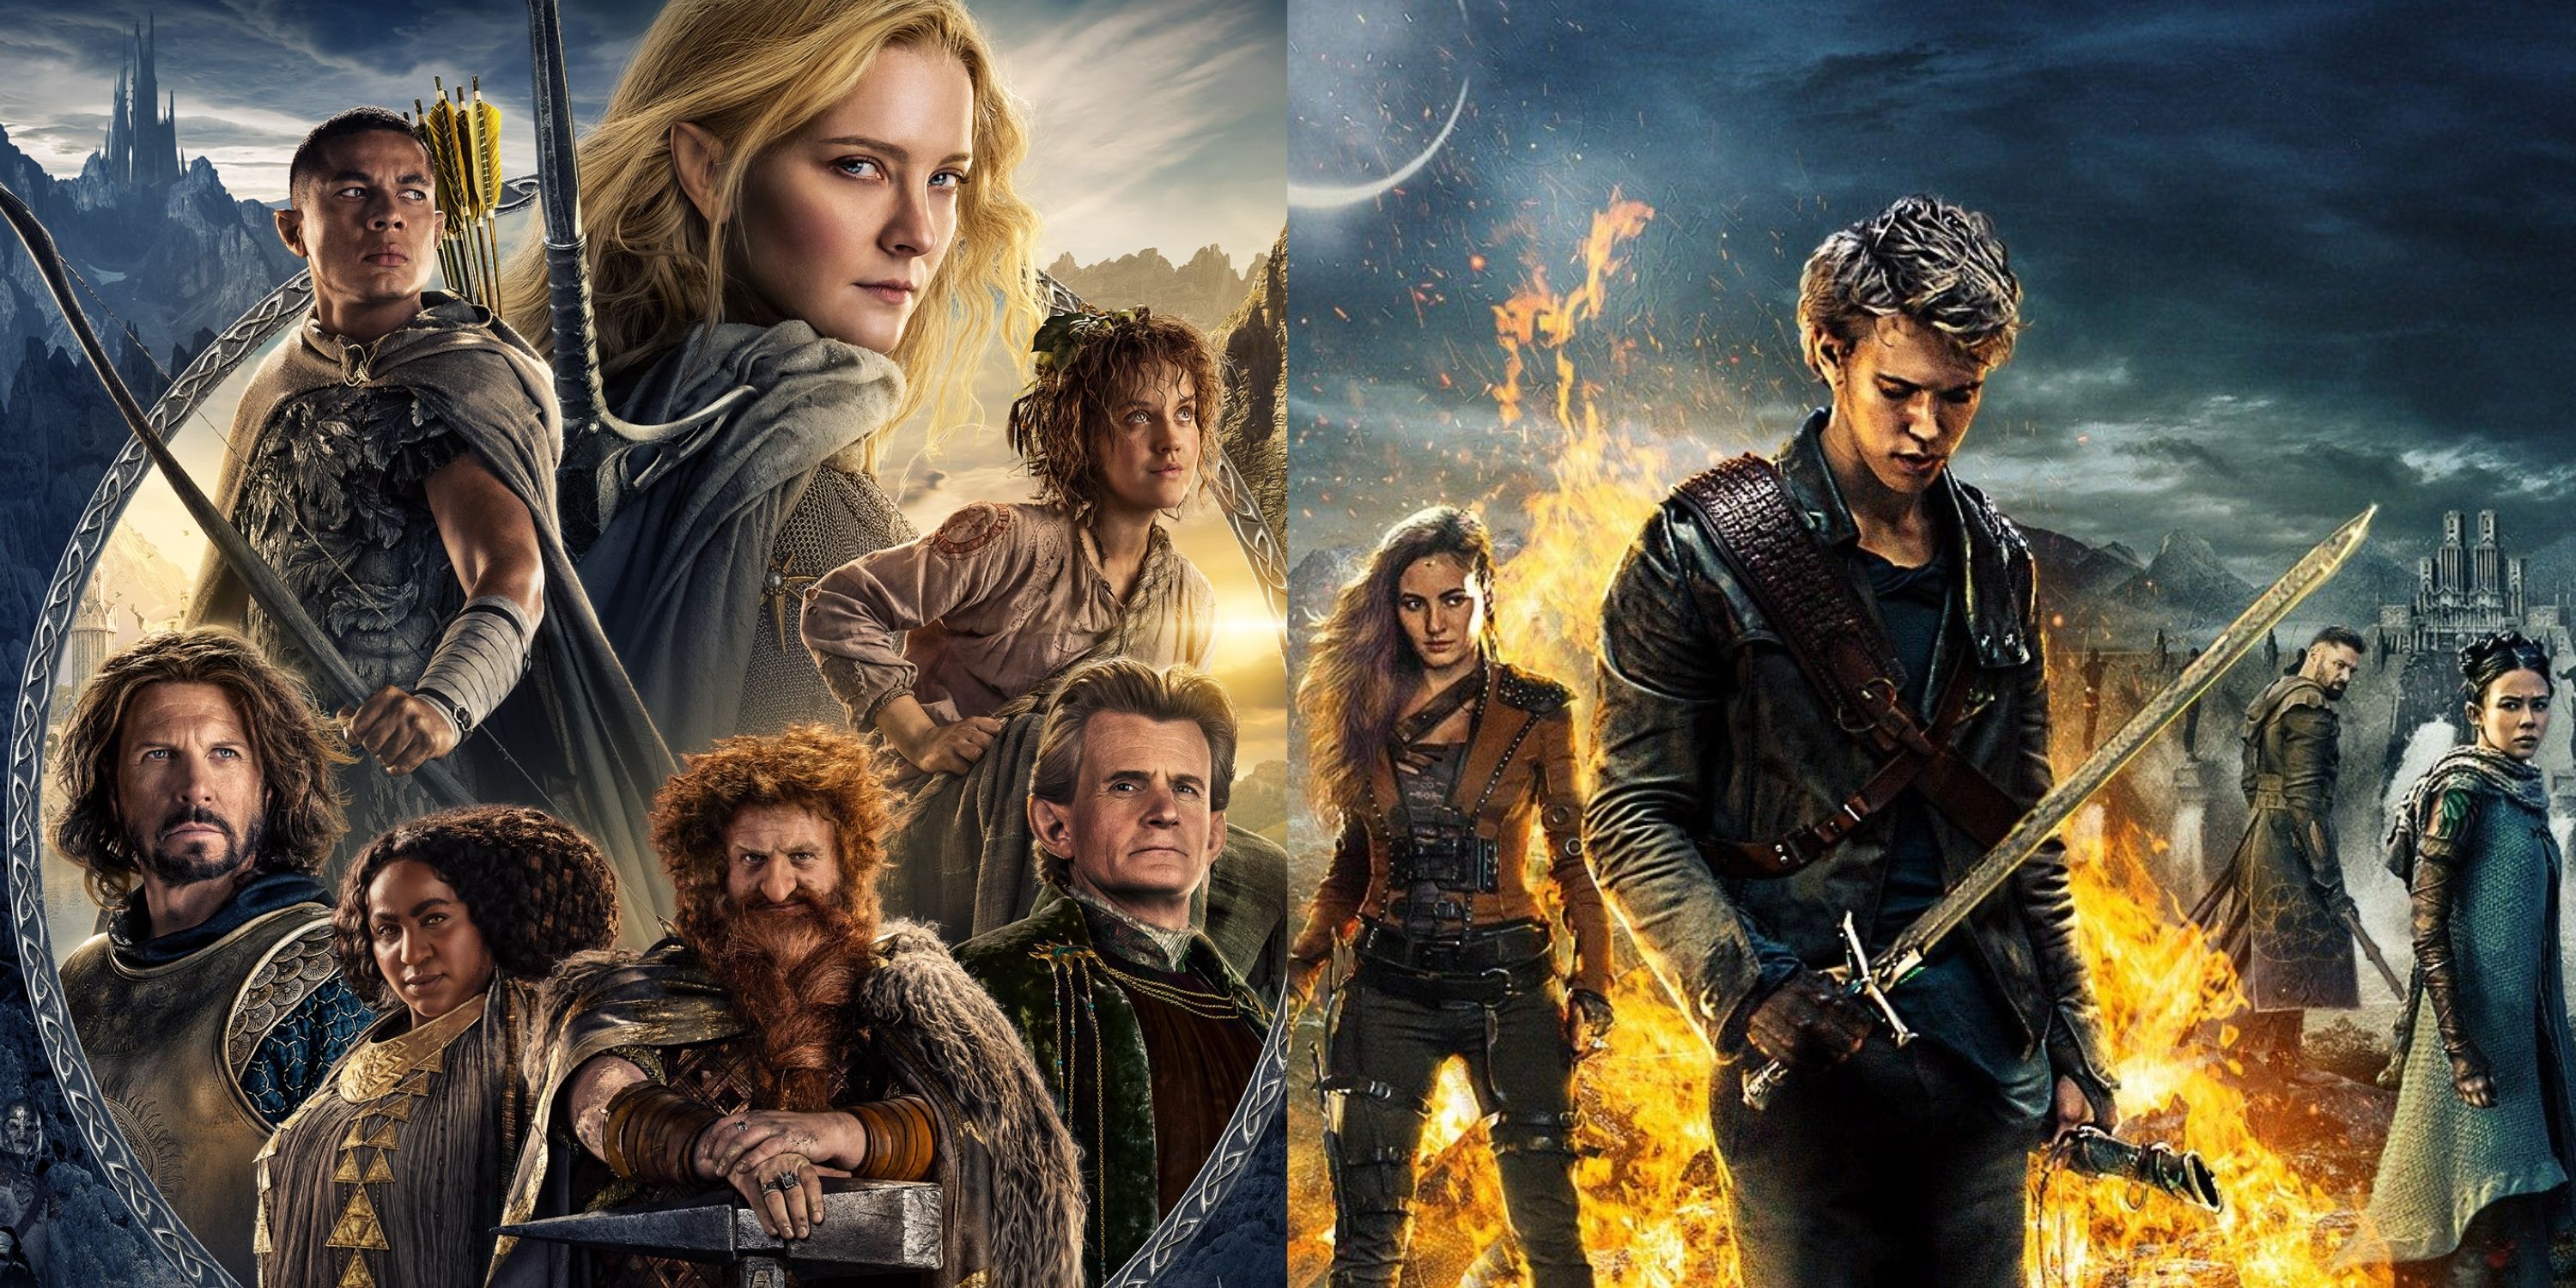 Split image of the posters of Rings of Power and Shannara Chronicles